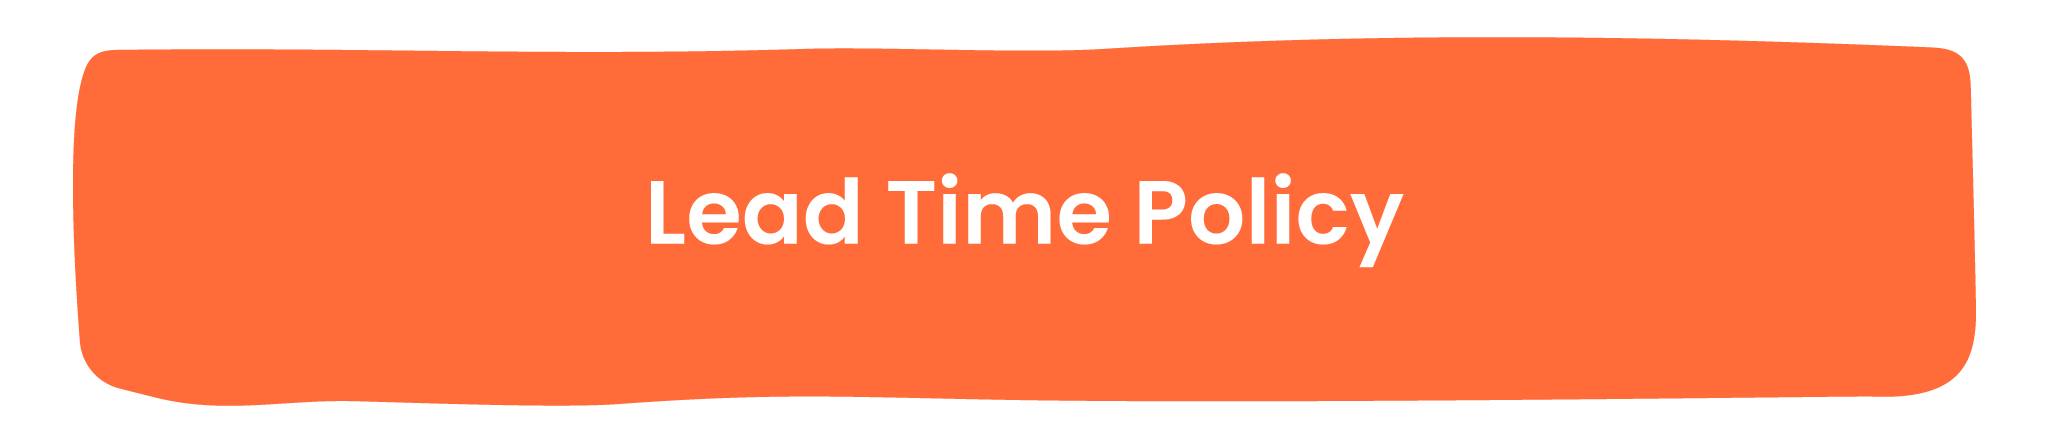 Lead Time Policy